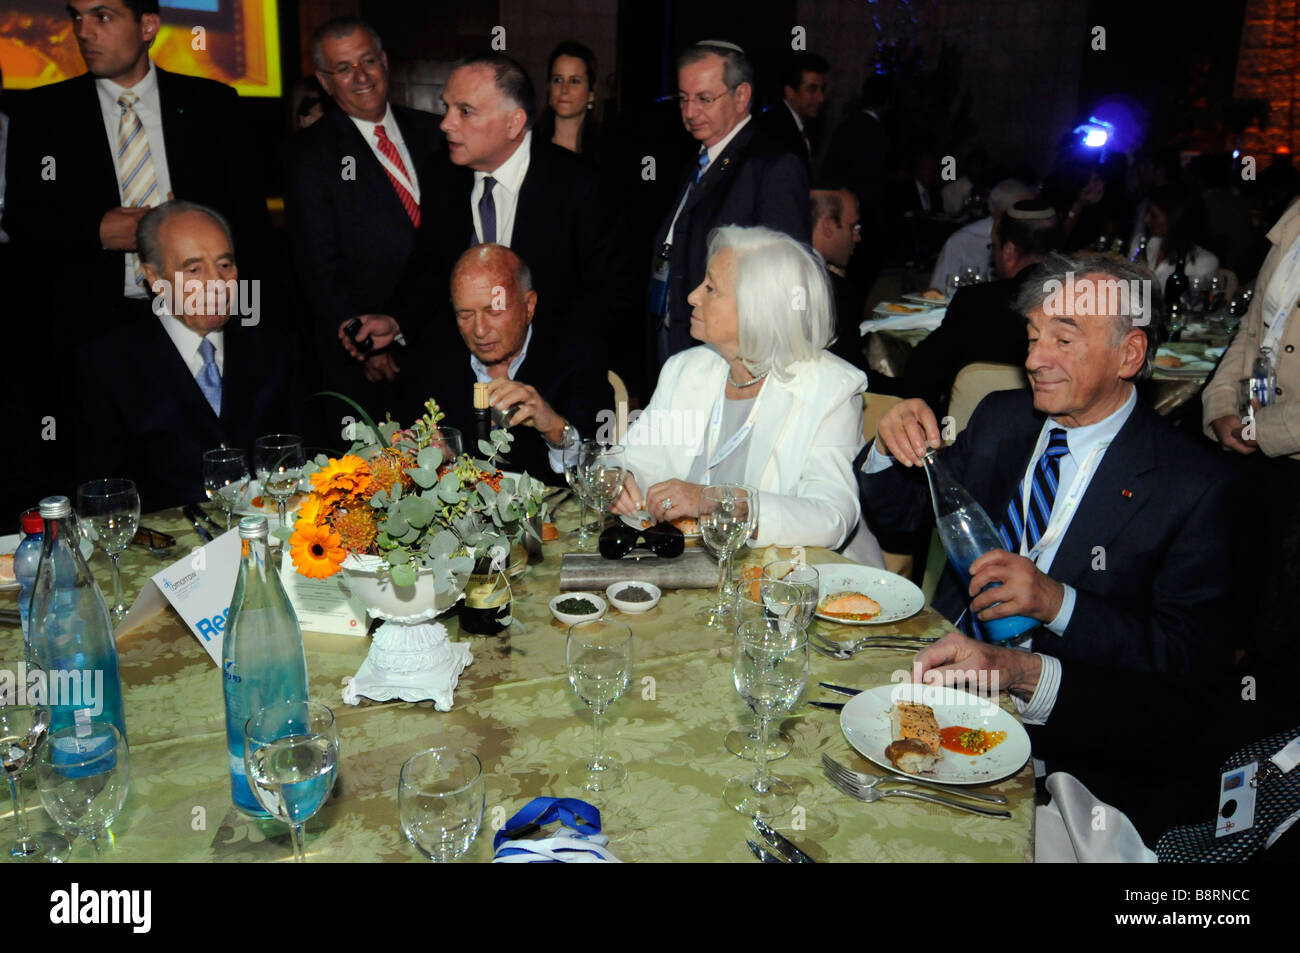 Elie Wiesel (R) dining with Israeli president Shimon Peres (L) during a conference in Jerusalem. Stock Photo